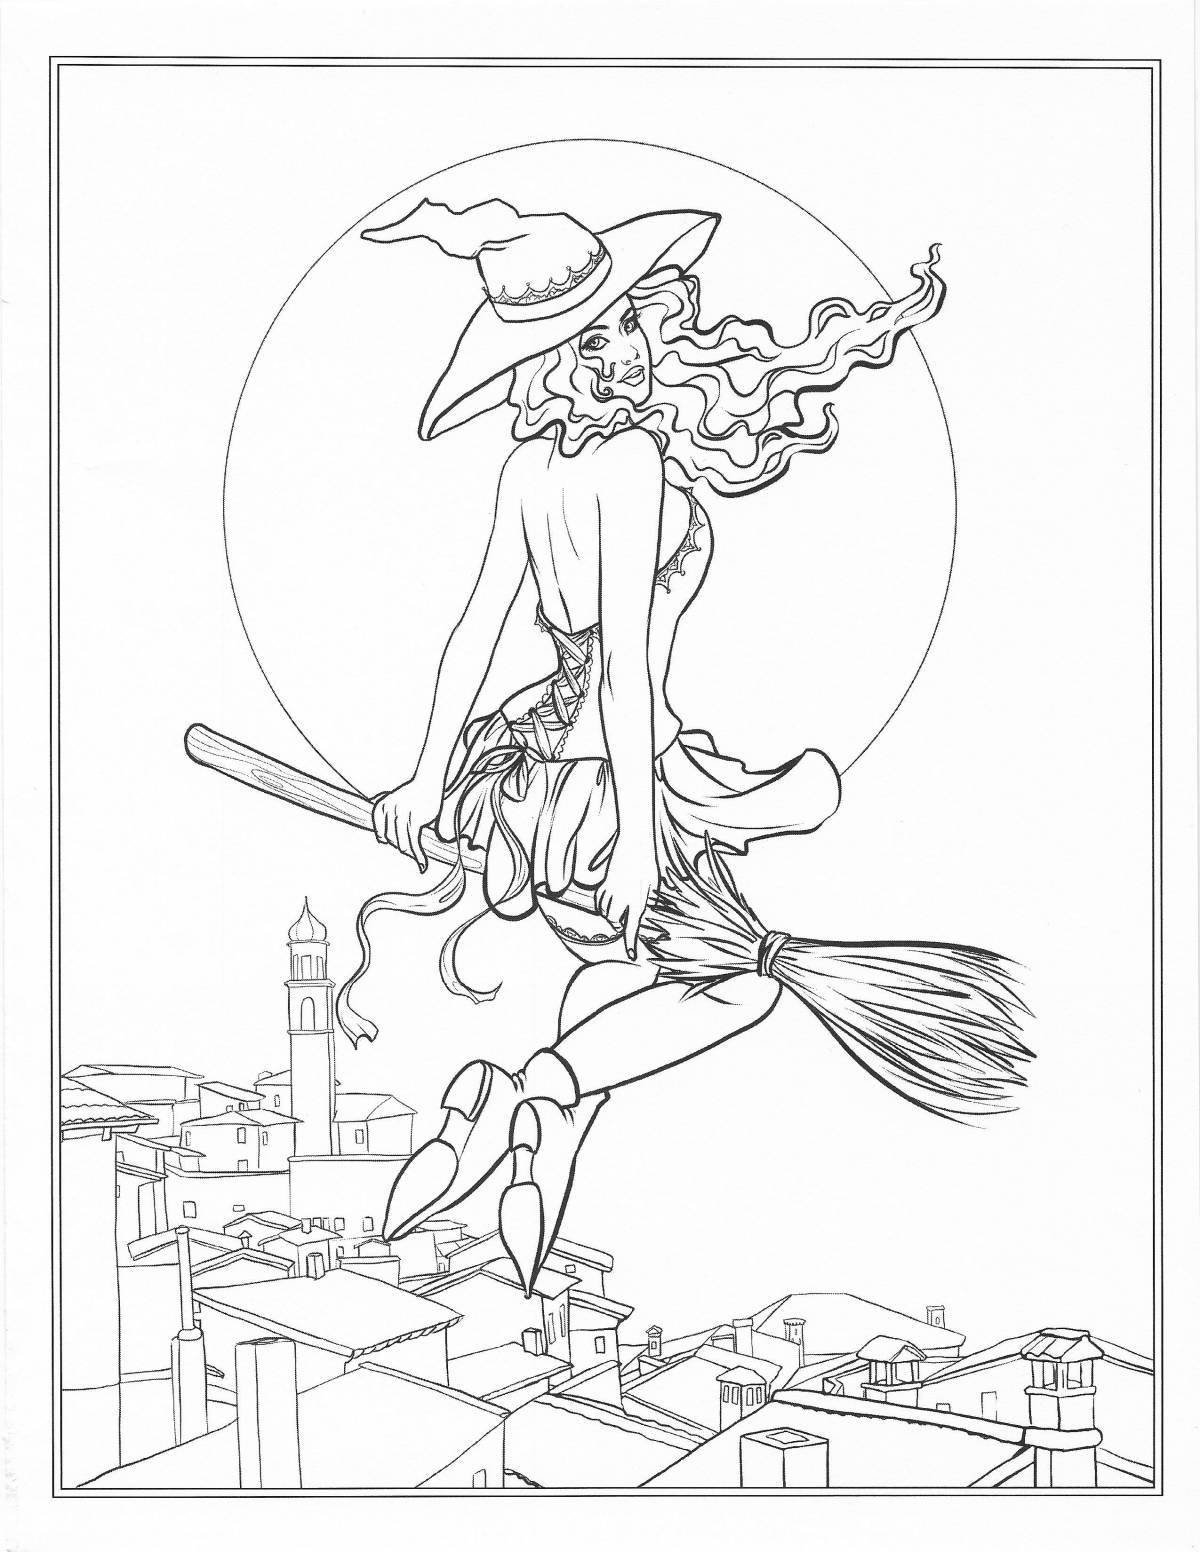 Charming aya and witch coloring book